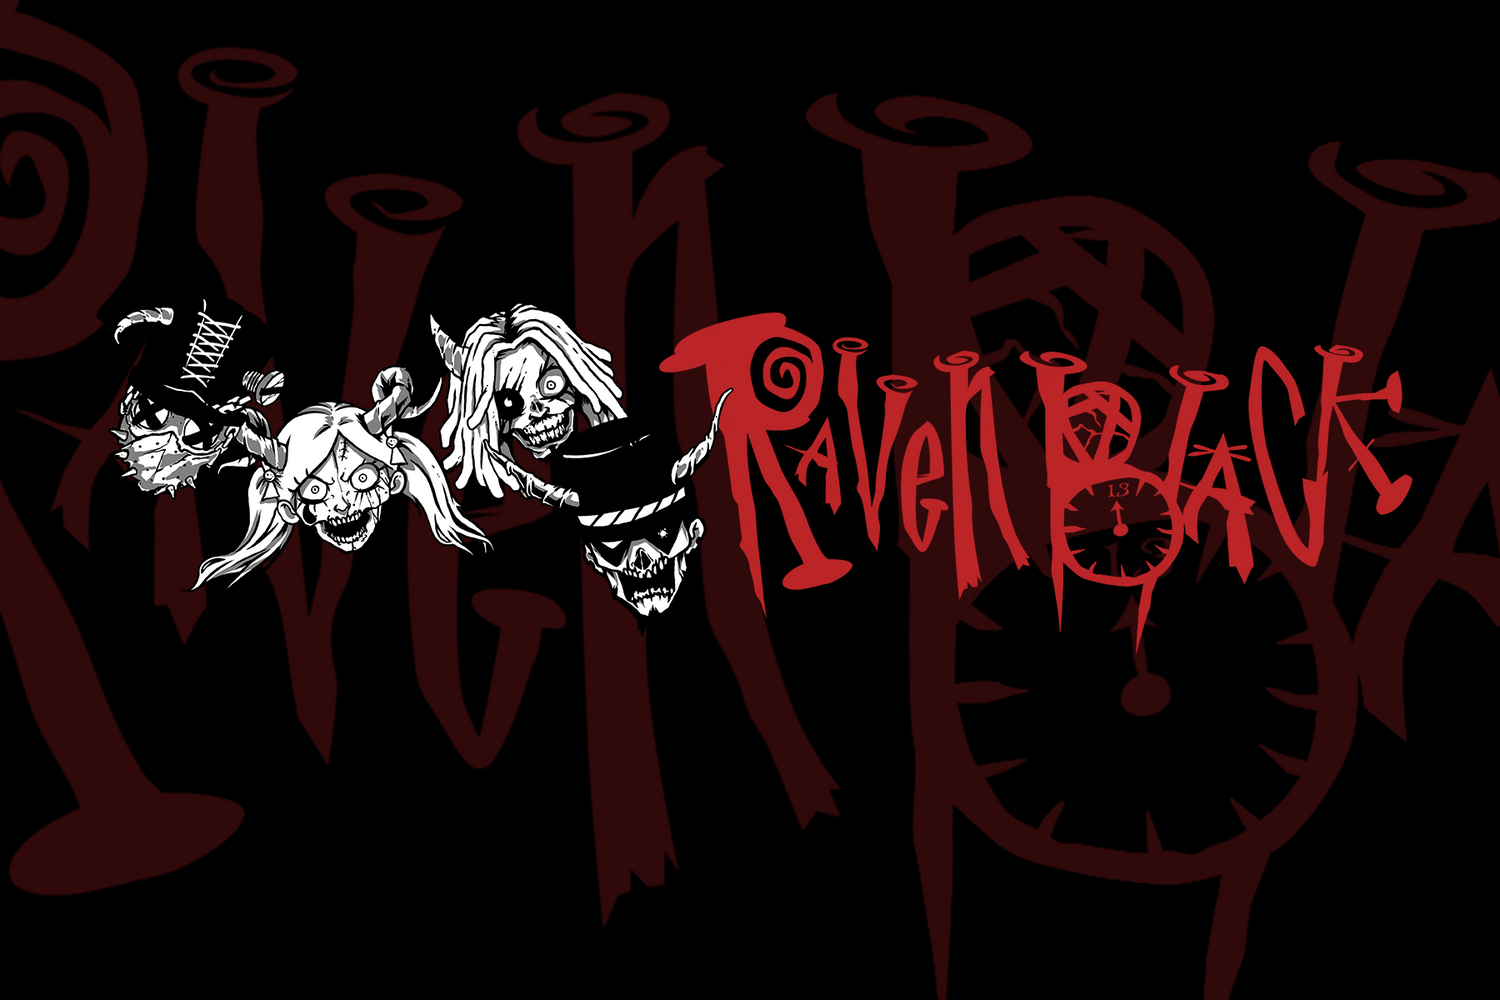 raven black logo with cartoon character faces and heads of the band members in white raven, stitches, mapped, doctor 